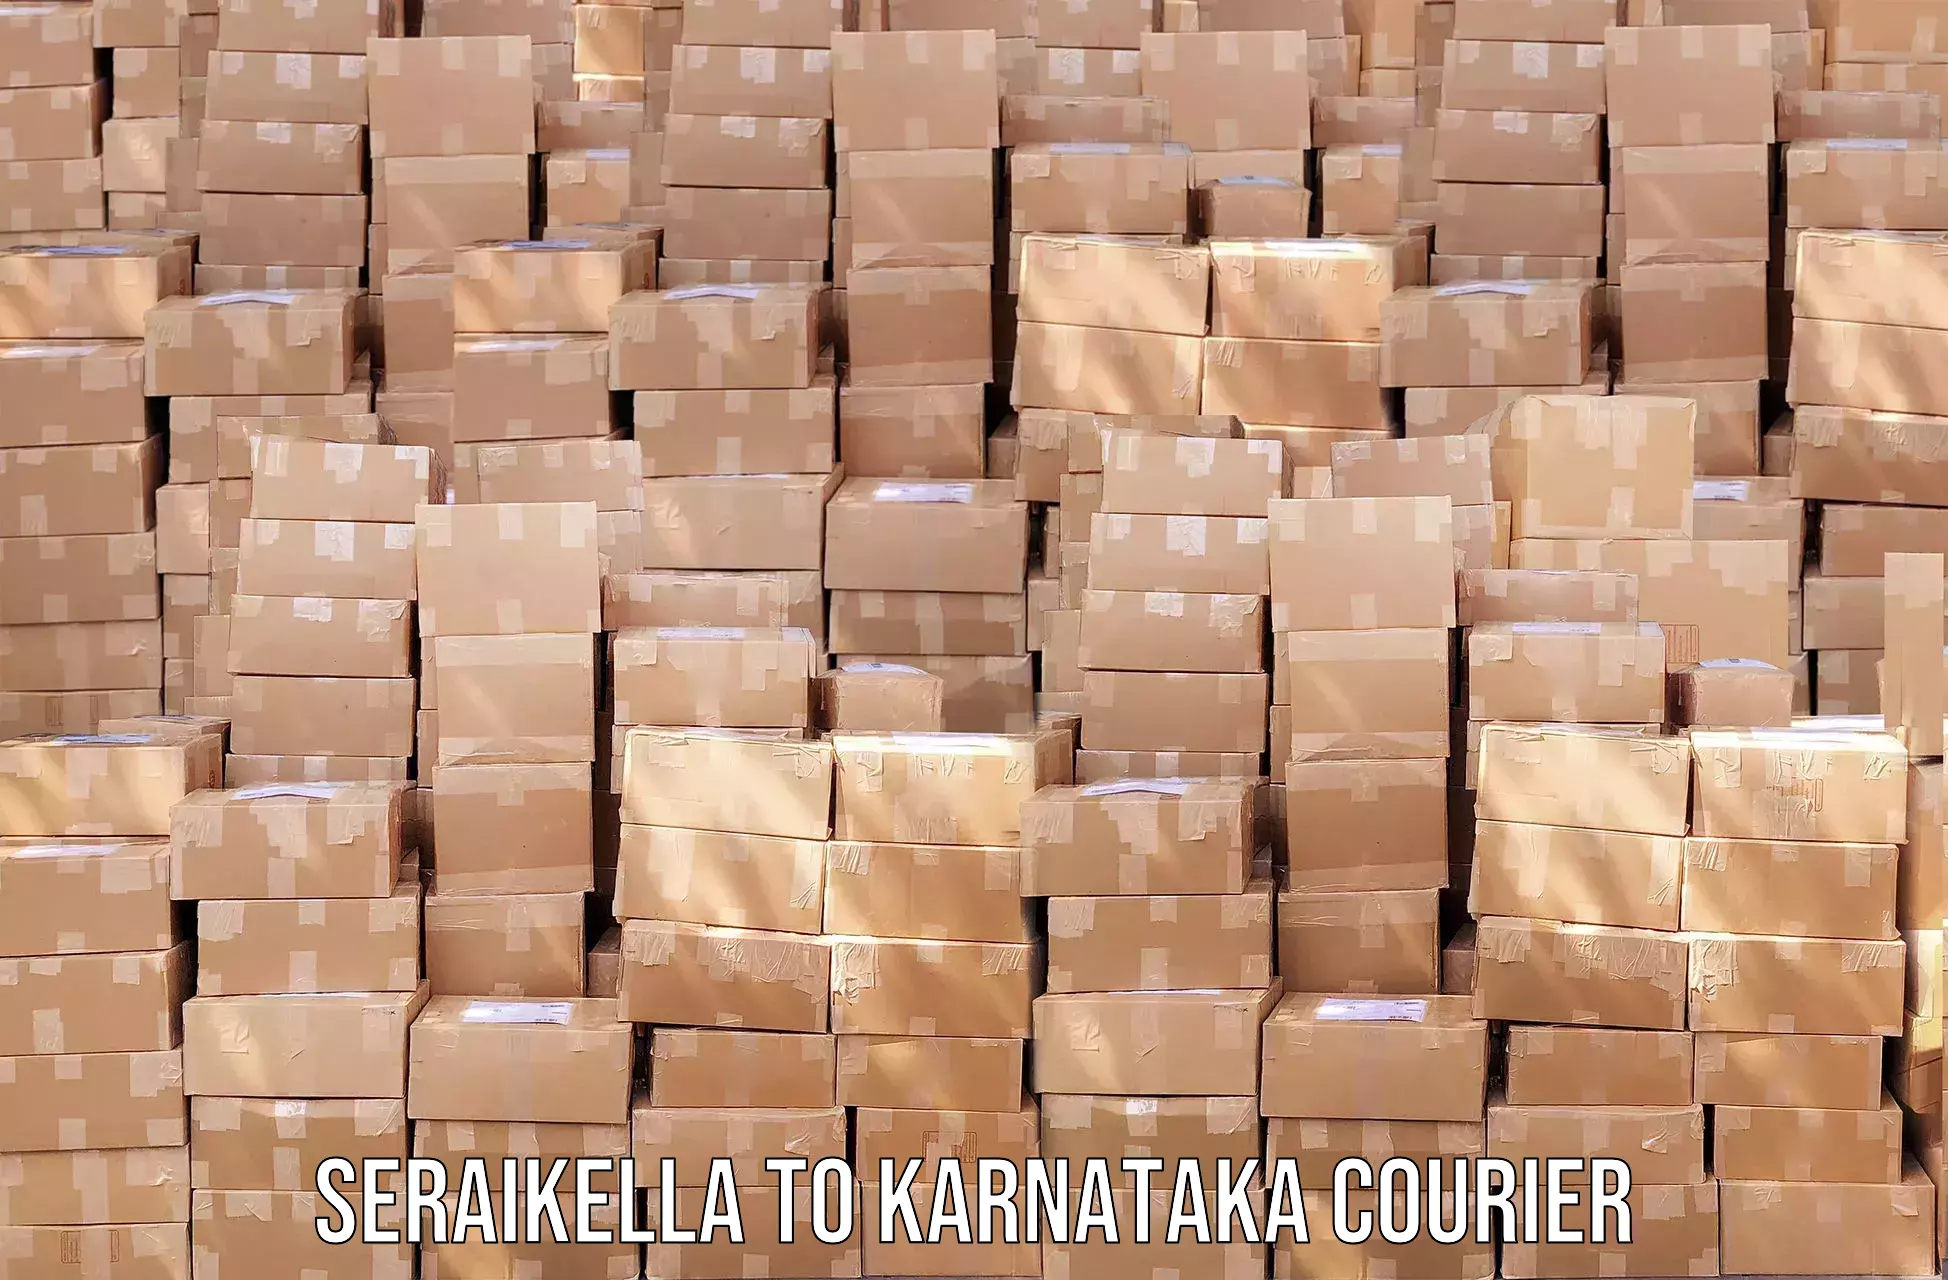 Expedited parcel delivery in Seraikella to Kalaburagi